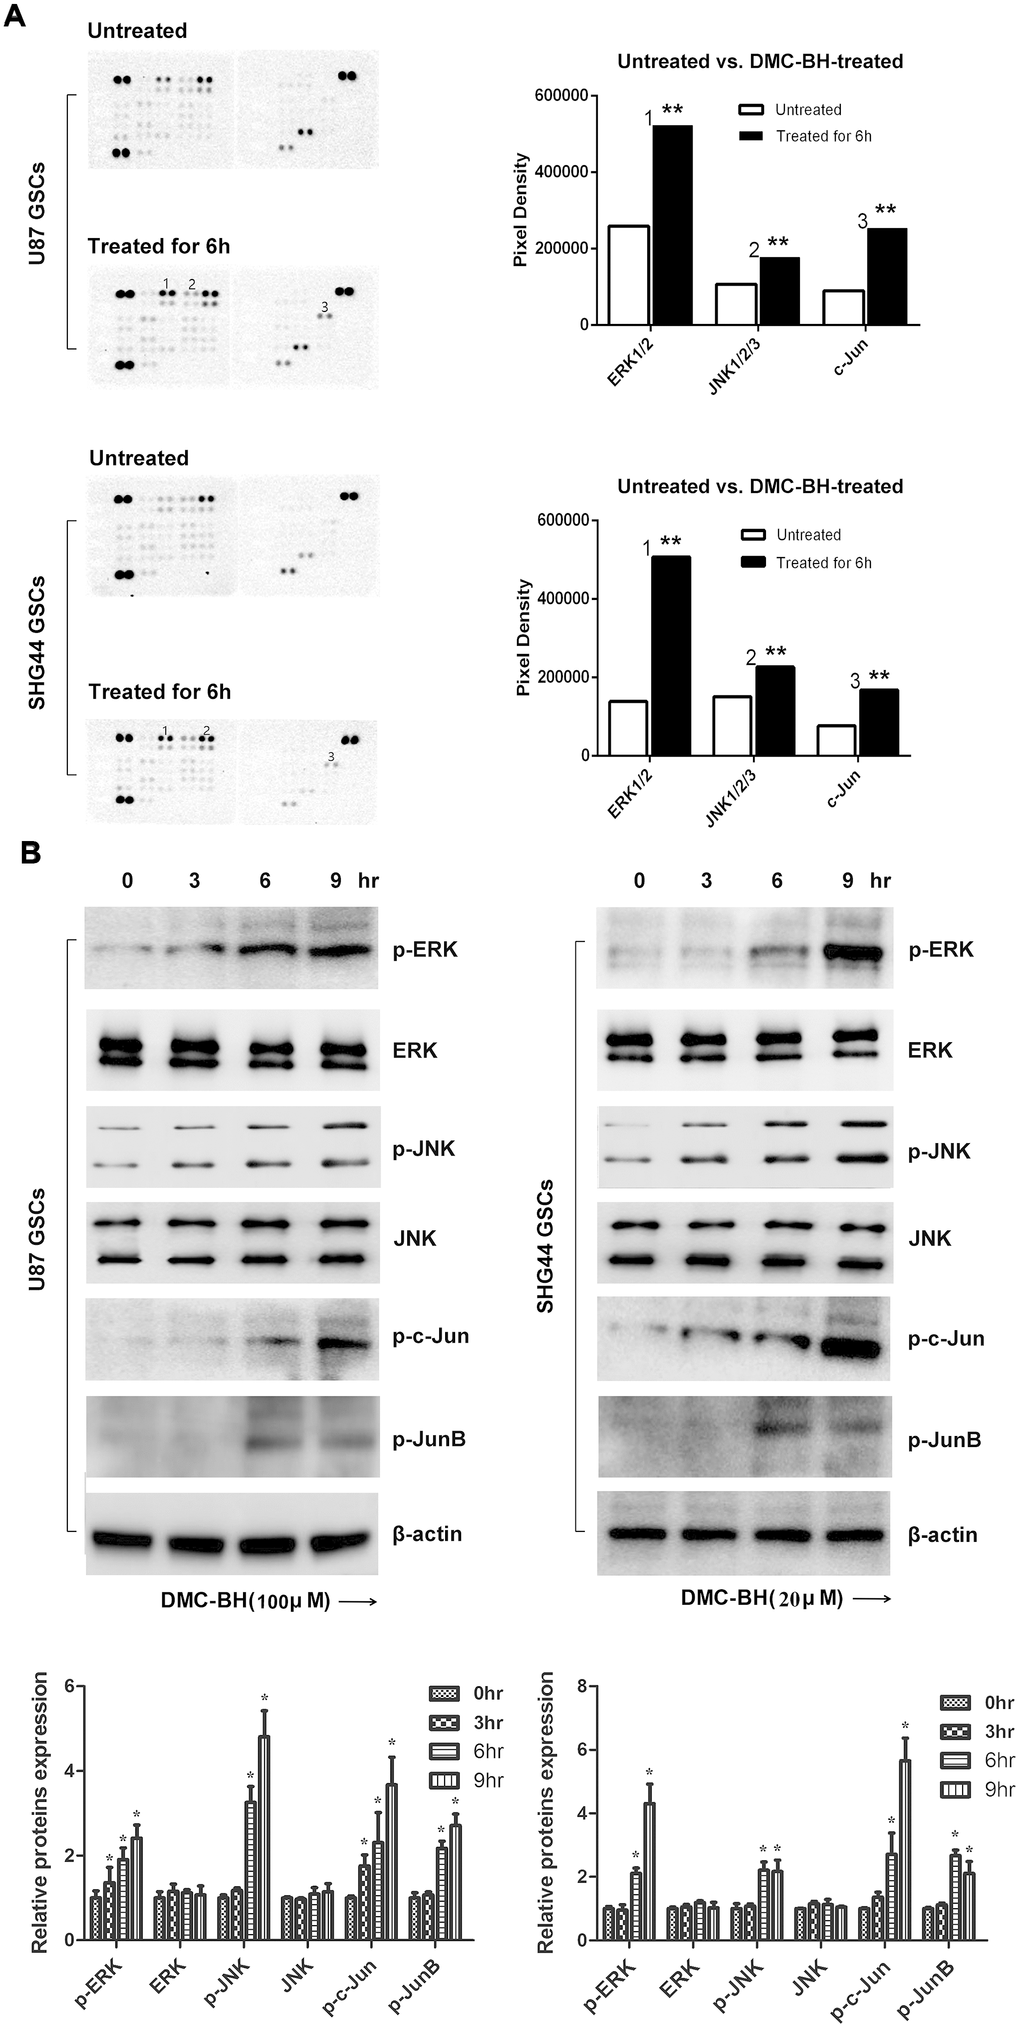 DMC-BH-induced apoptosis in GSCs is mediated by JNK/ERK signaling. (A) Phosphorylation protein levels in DMC-BH-treated GSCs analyzed by Proteome Profiler Human Phospho-Kinase Array. (B) Western analysis of phosphorylated levels of MAPK-related proteins p-ERK, p-JNK, p-c-Jun, and p-JunB in DMC-BH-treated GSCs.